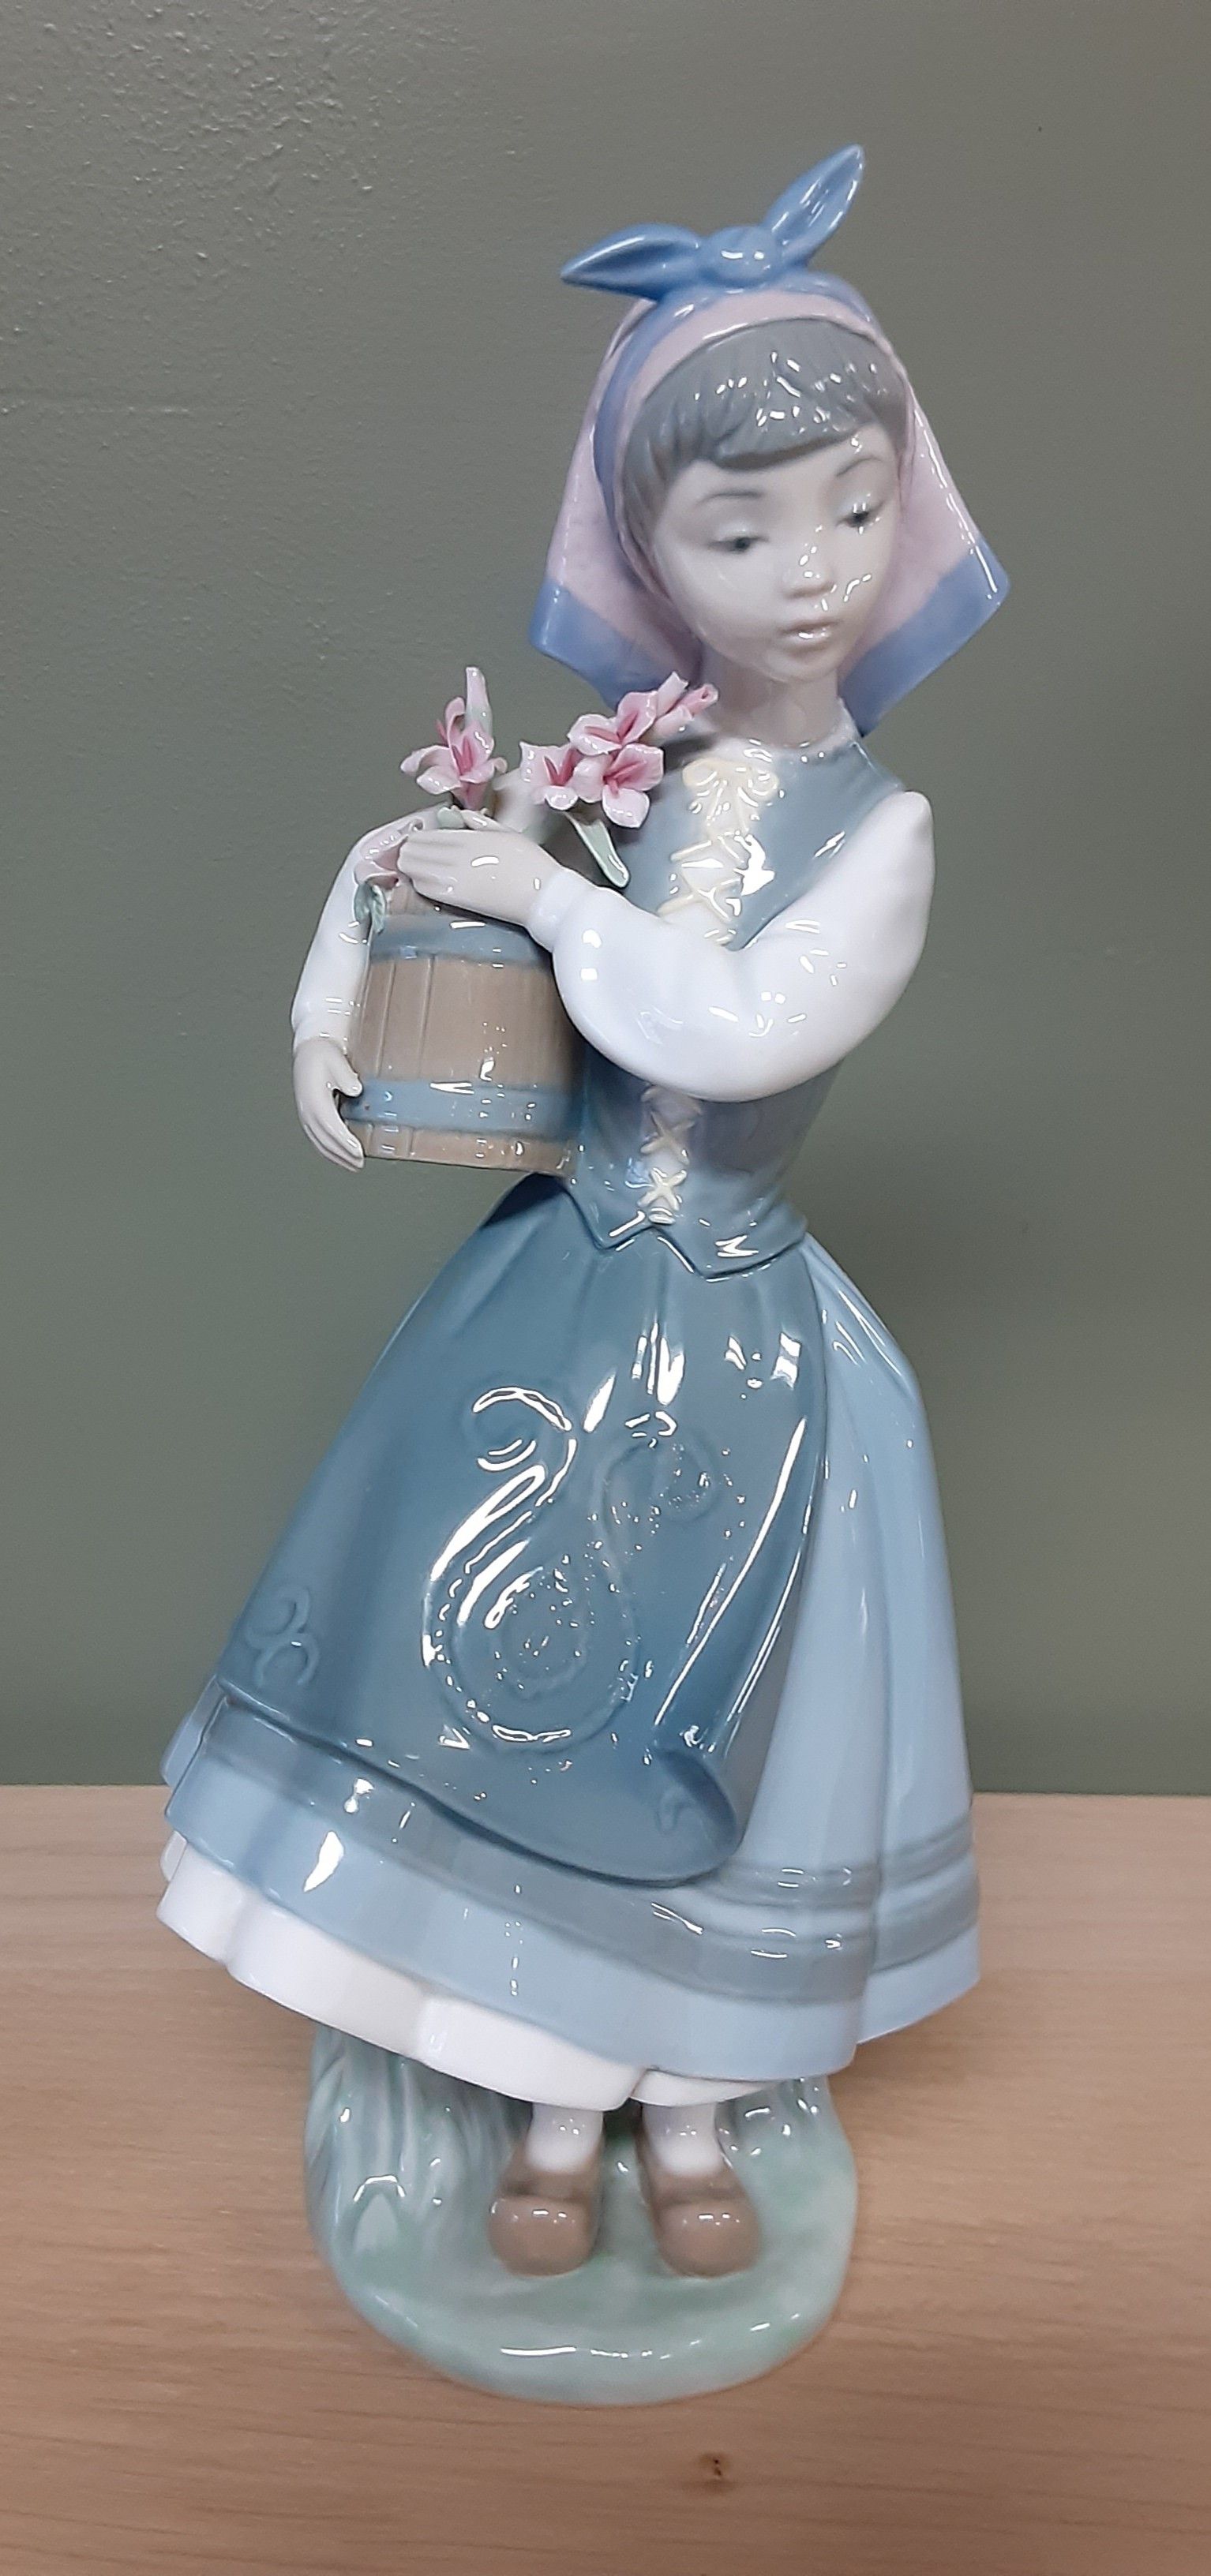 Lladro girl with flower basket.